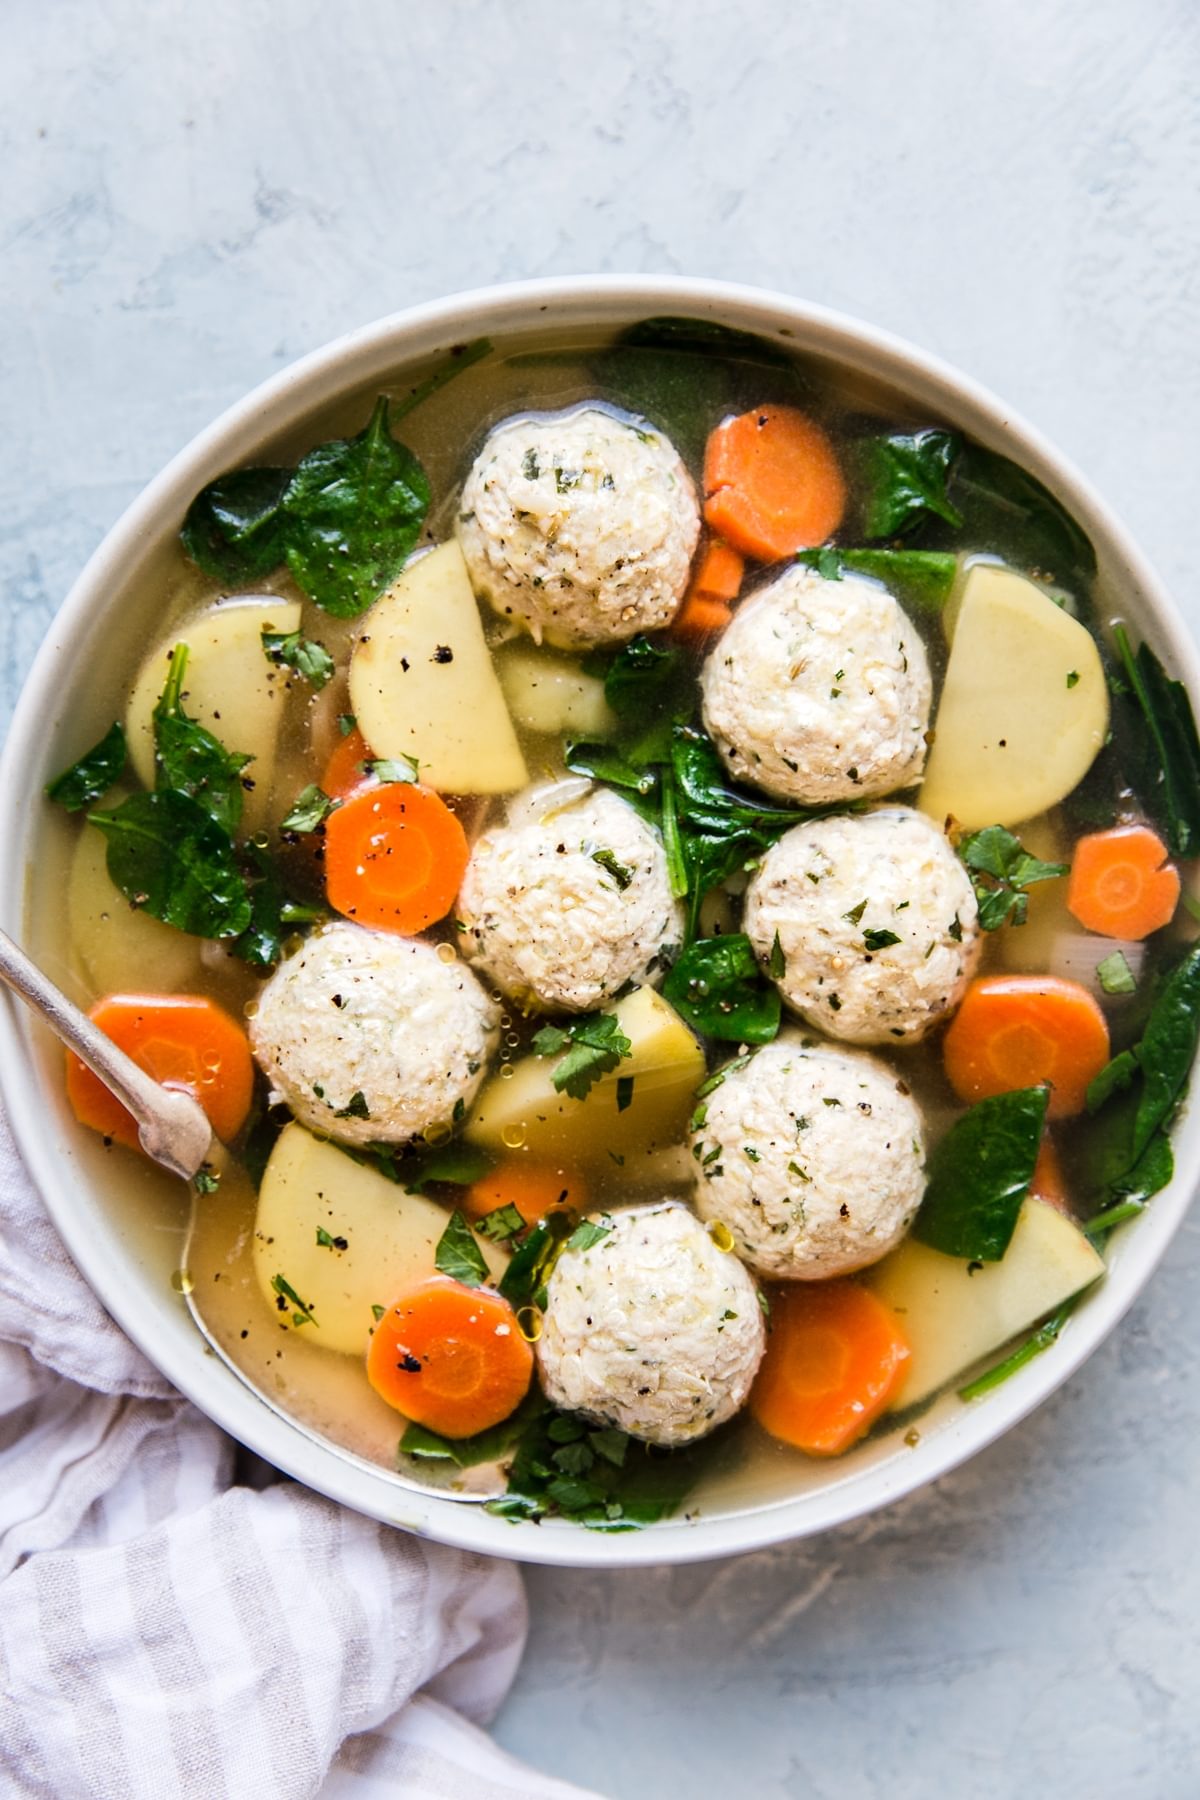 A bowl of chicken meatball soup with carrots, potatoes and kale